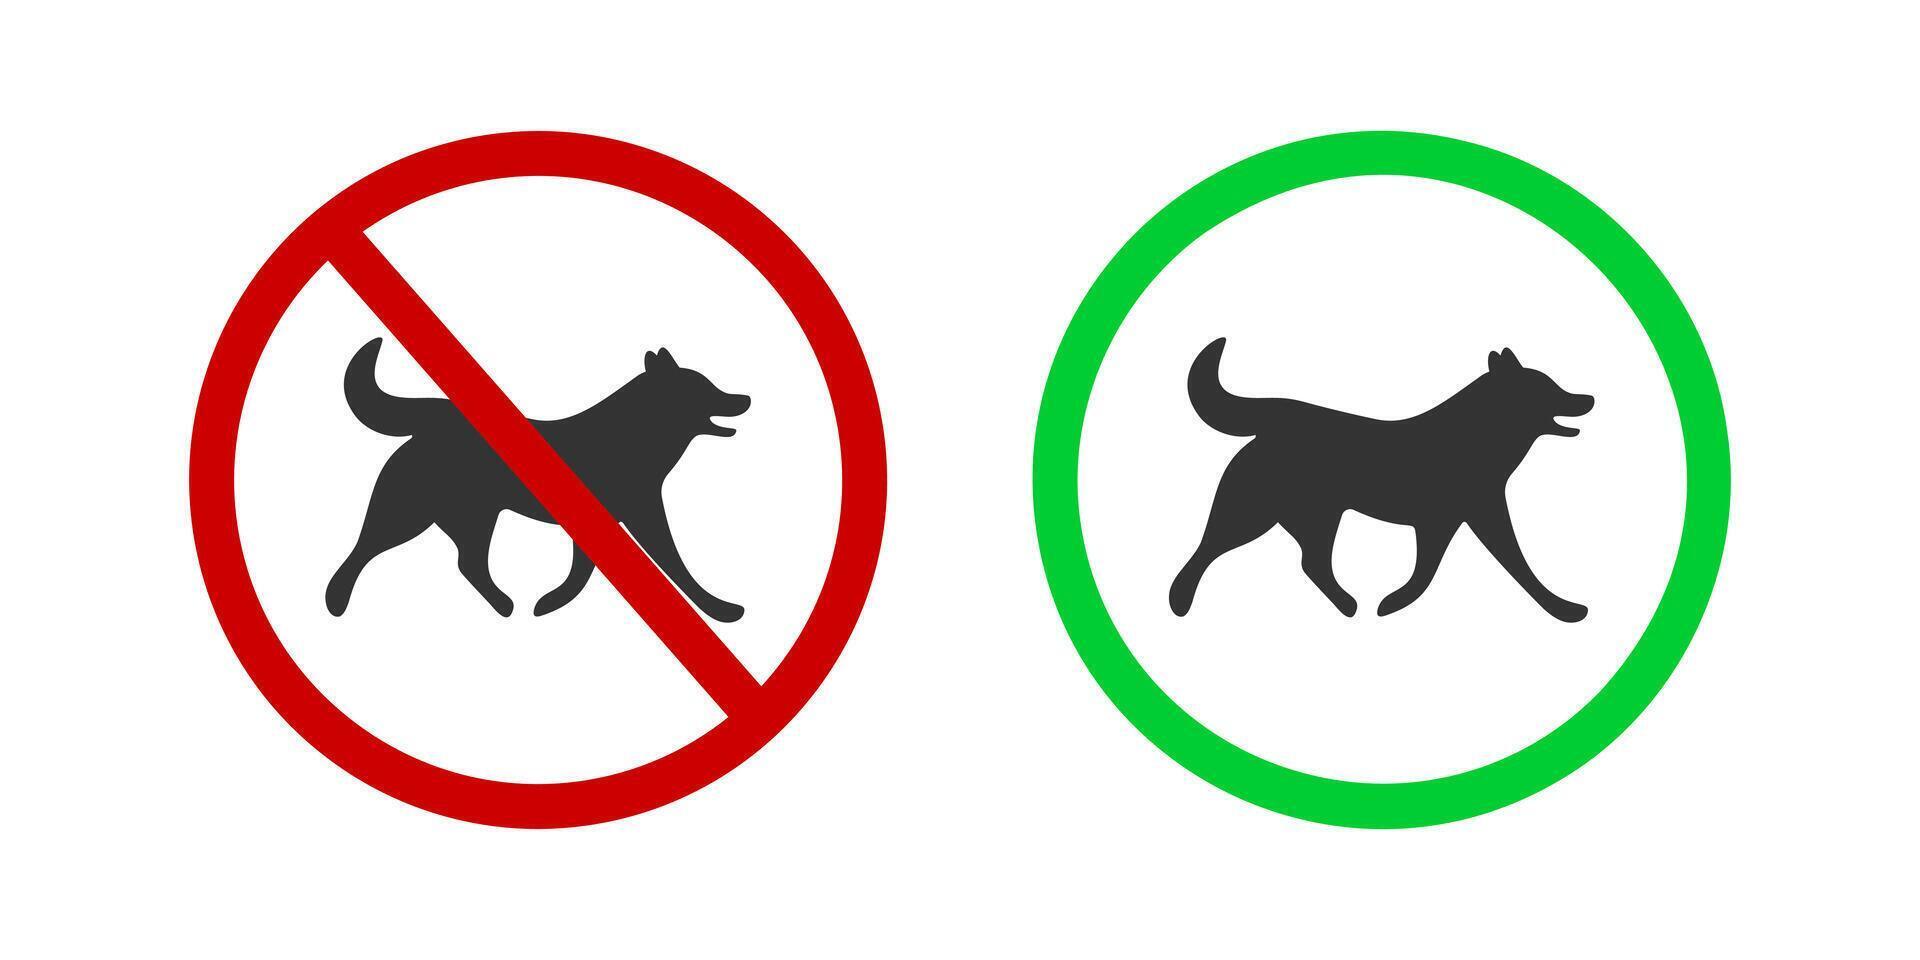 Dogs prohibited and allowed icon. Pets walking ban and friendly zone pictogram. Canine silhouette in red forbidden and green approved sign vector